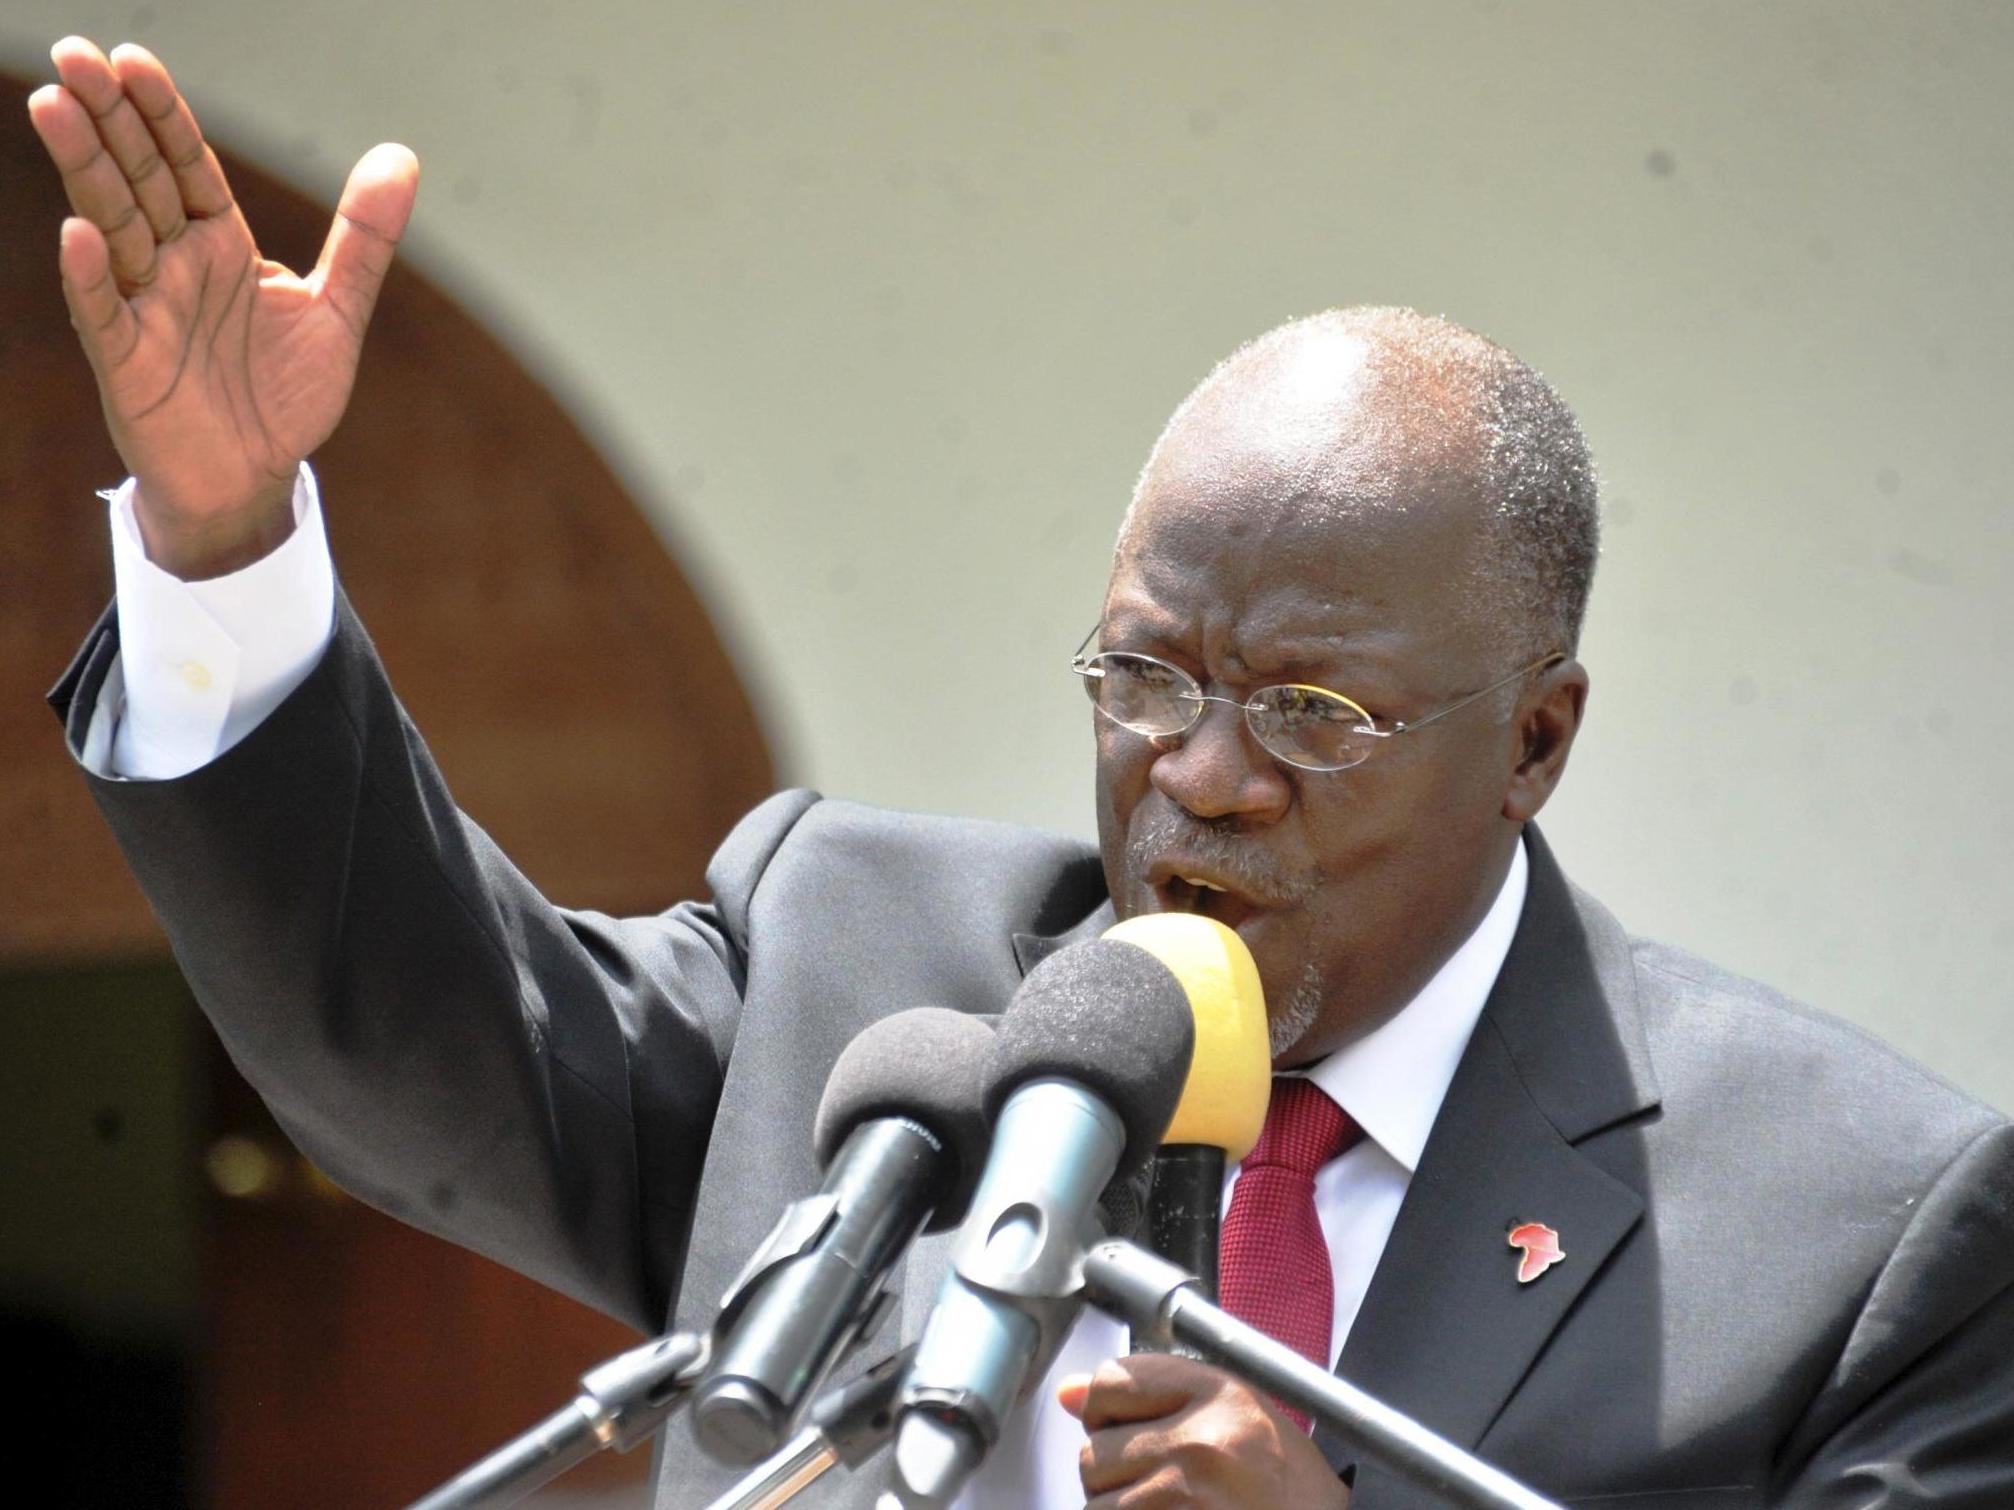 President John Magufuli's government has been criticised over growing authoritarianism